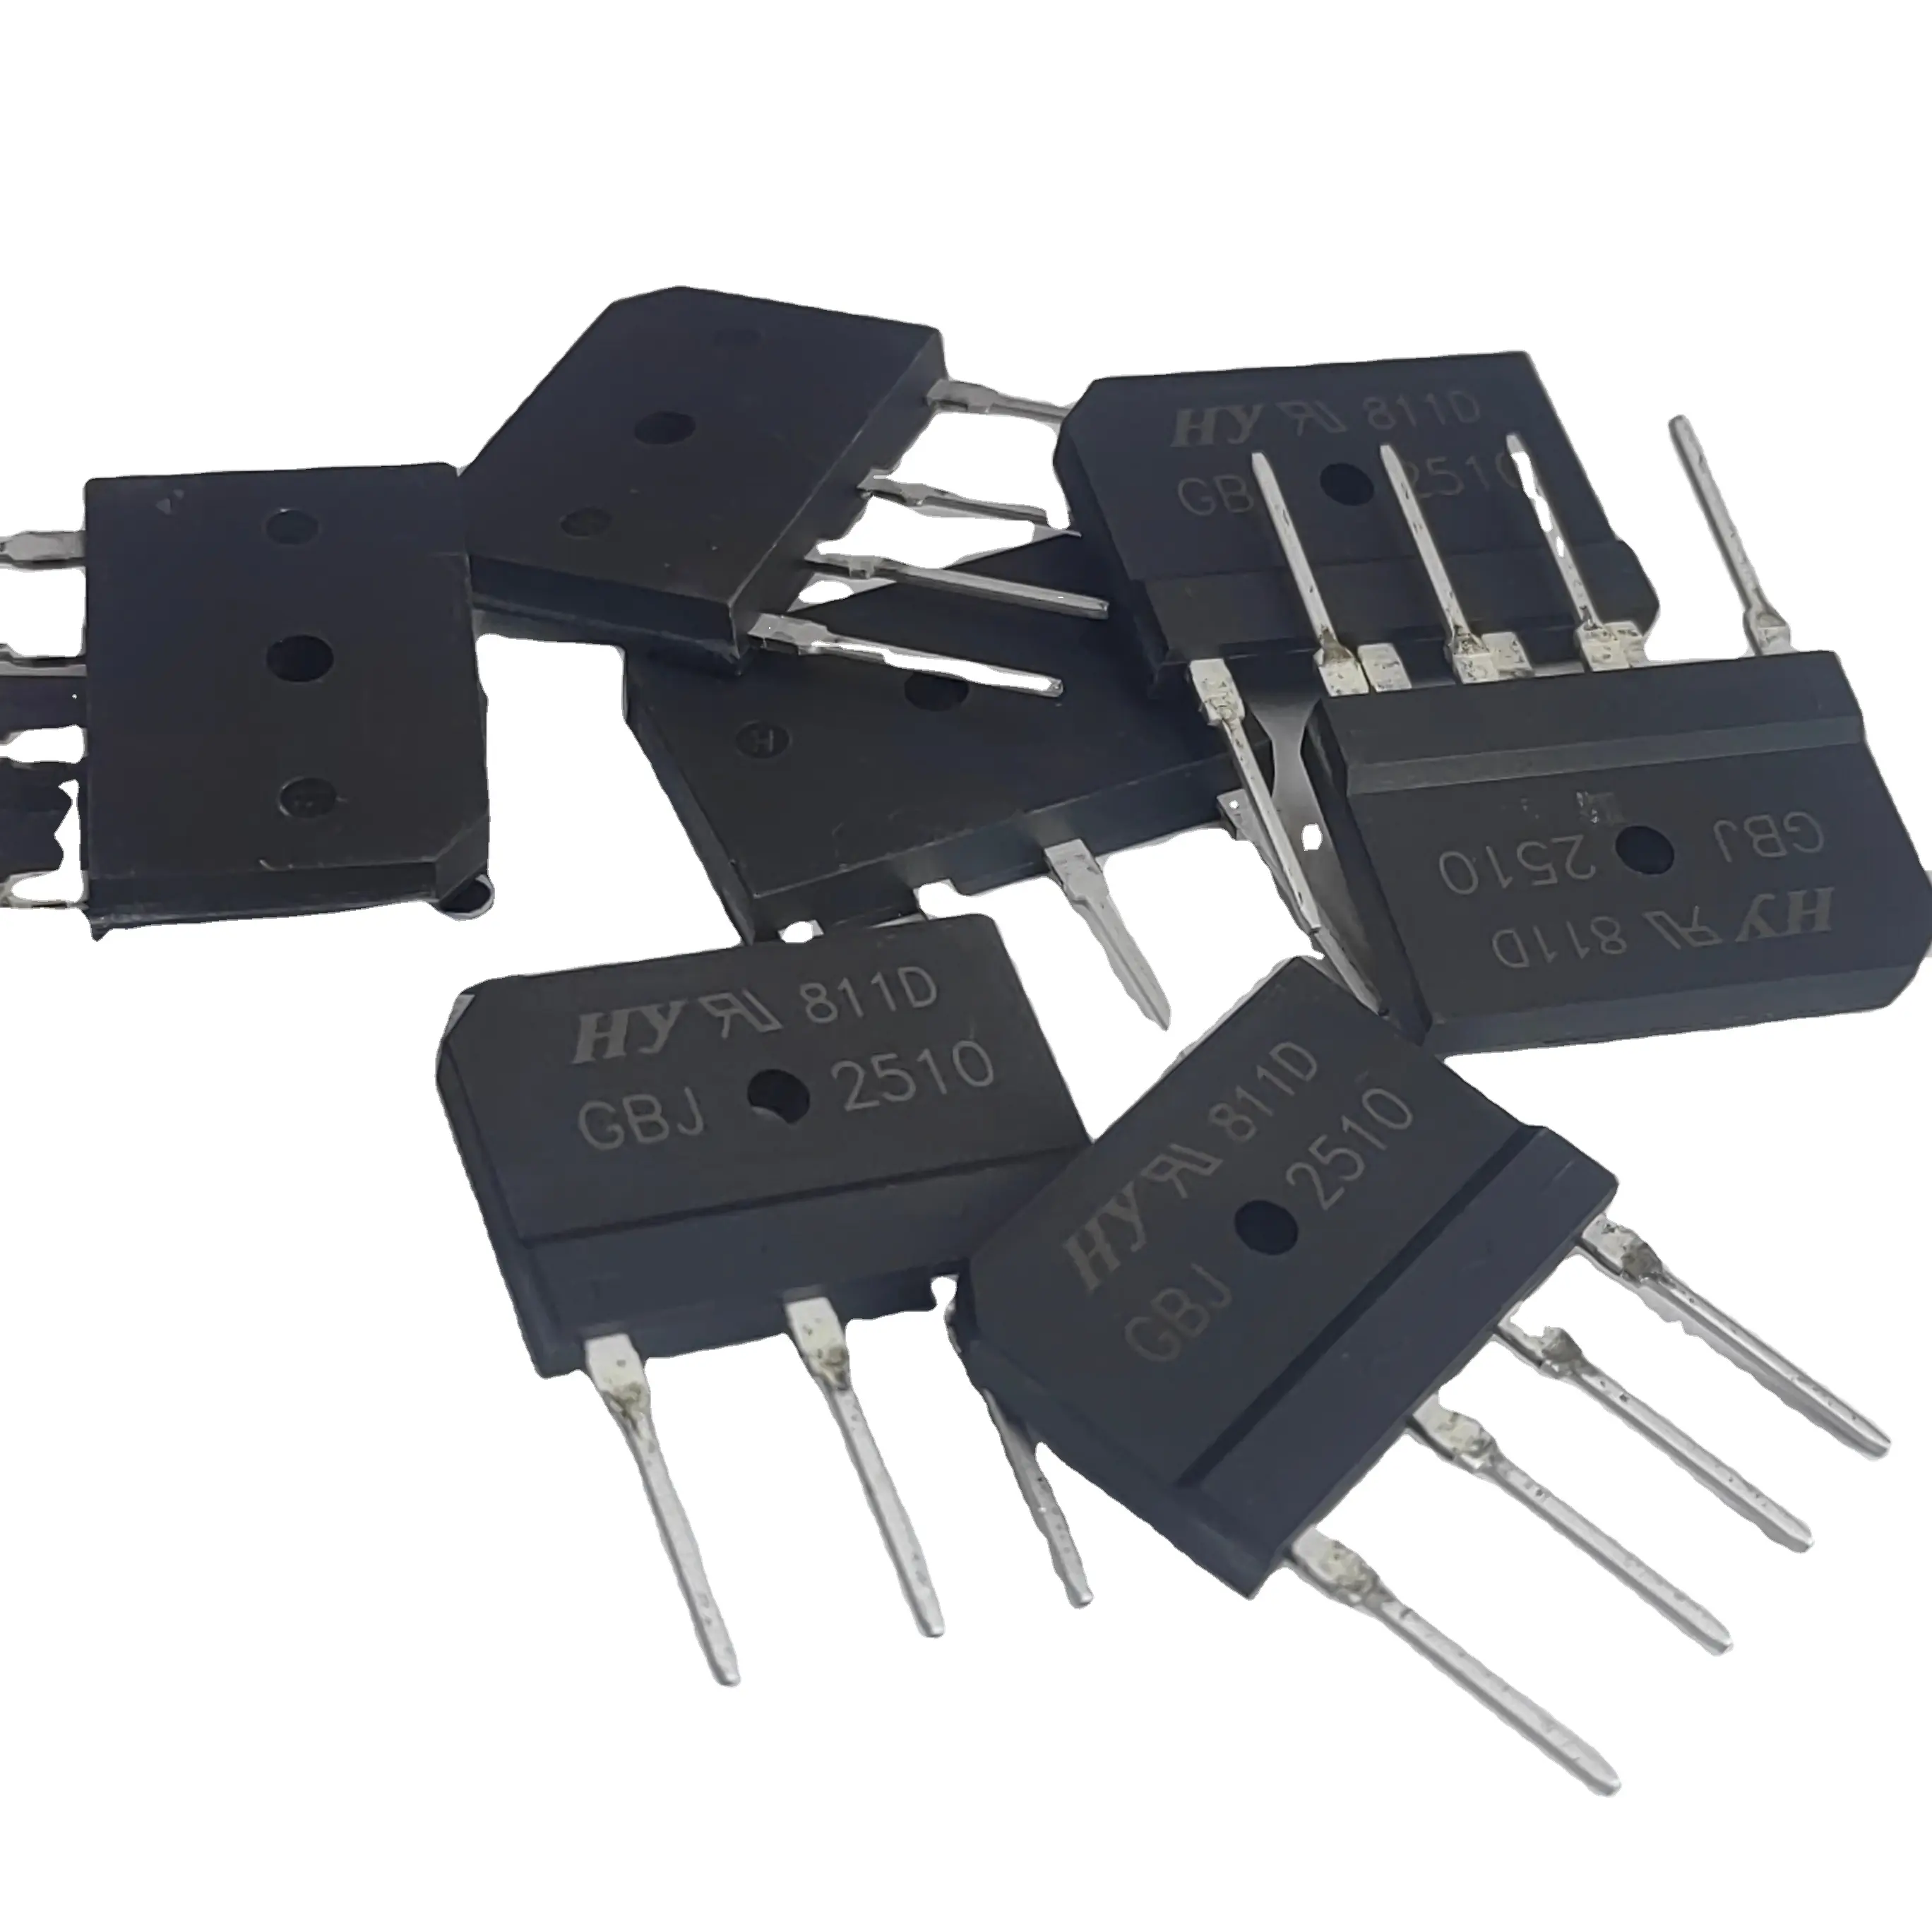 Pont à diodes GBJ2510 Package GBJ 20A/1000V Redresseur briage